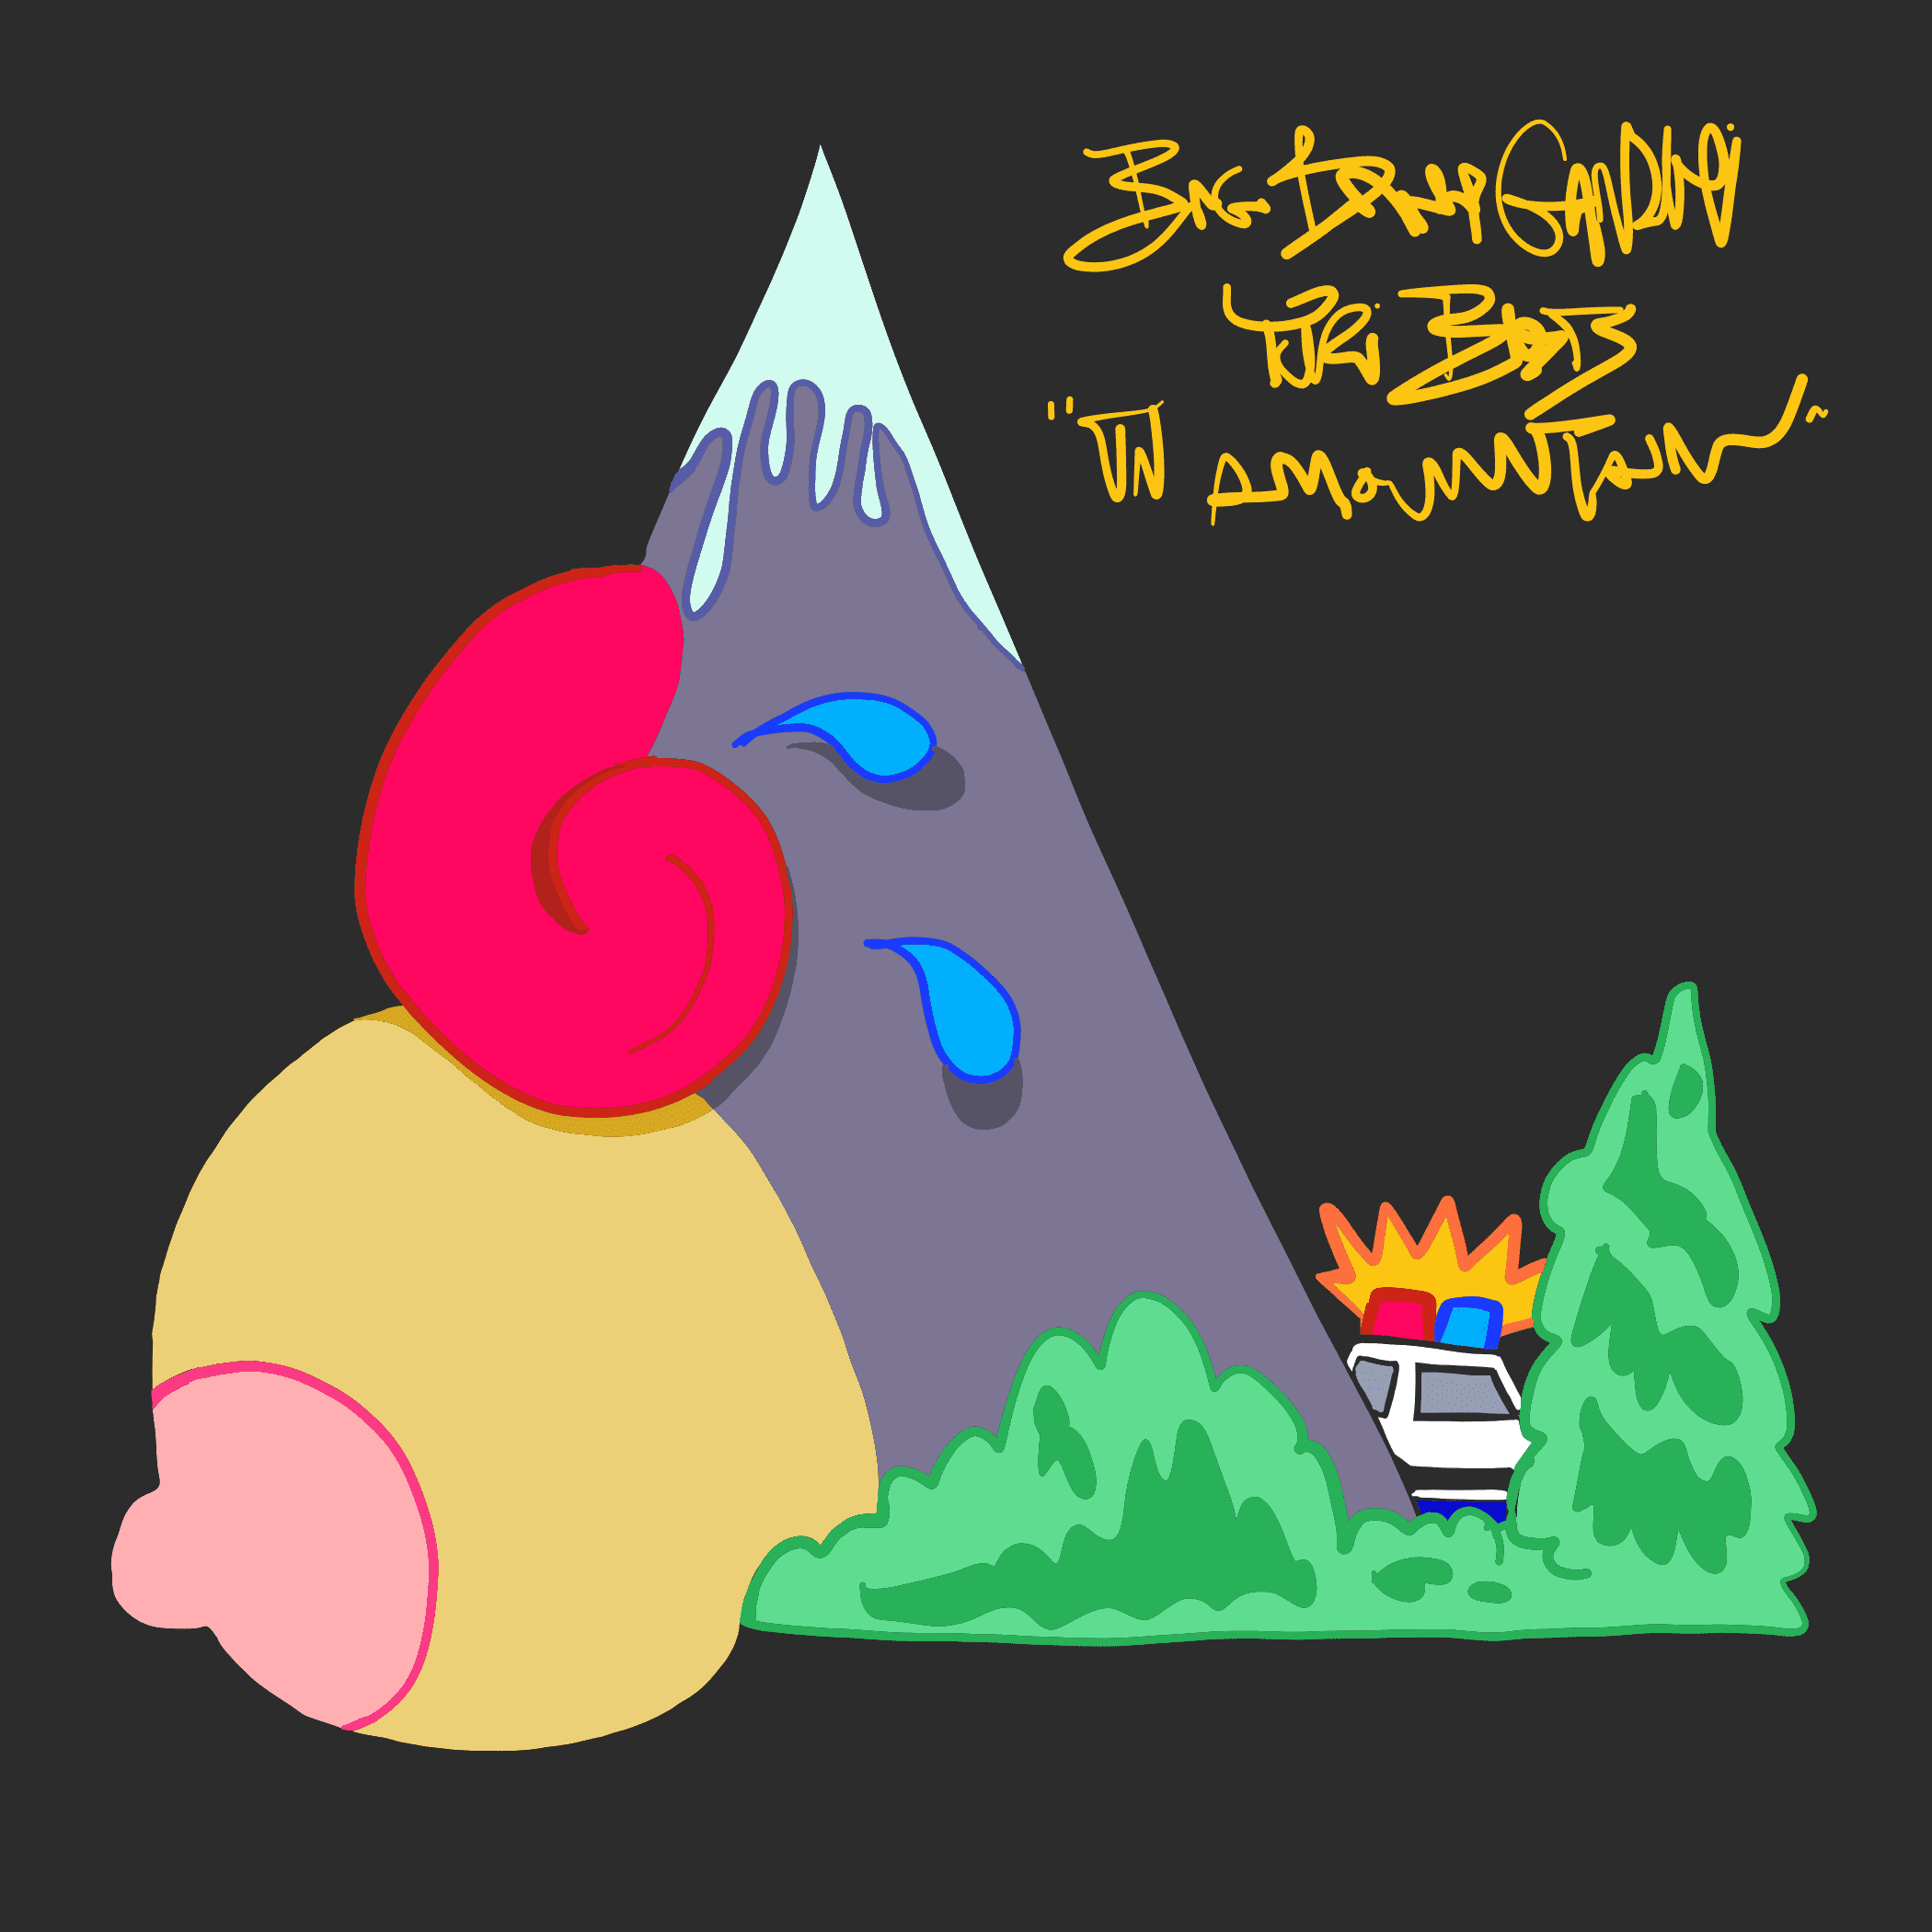 Cover art for yuri beats's song: On A Mountain Featuring Big Baby Gandhi